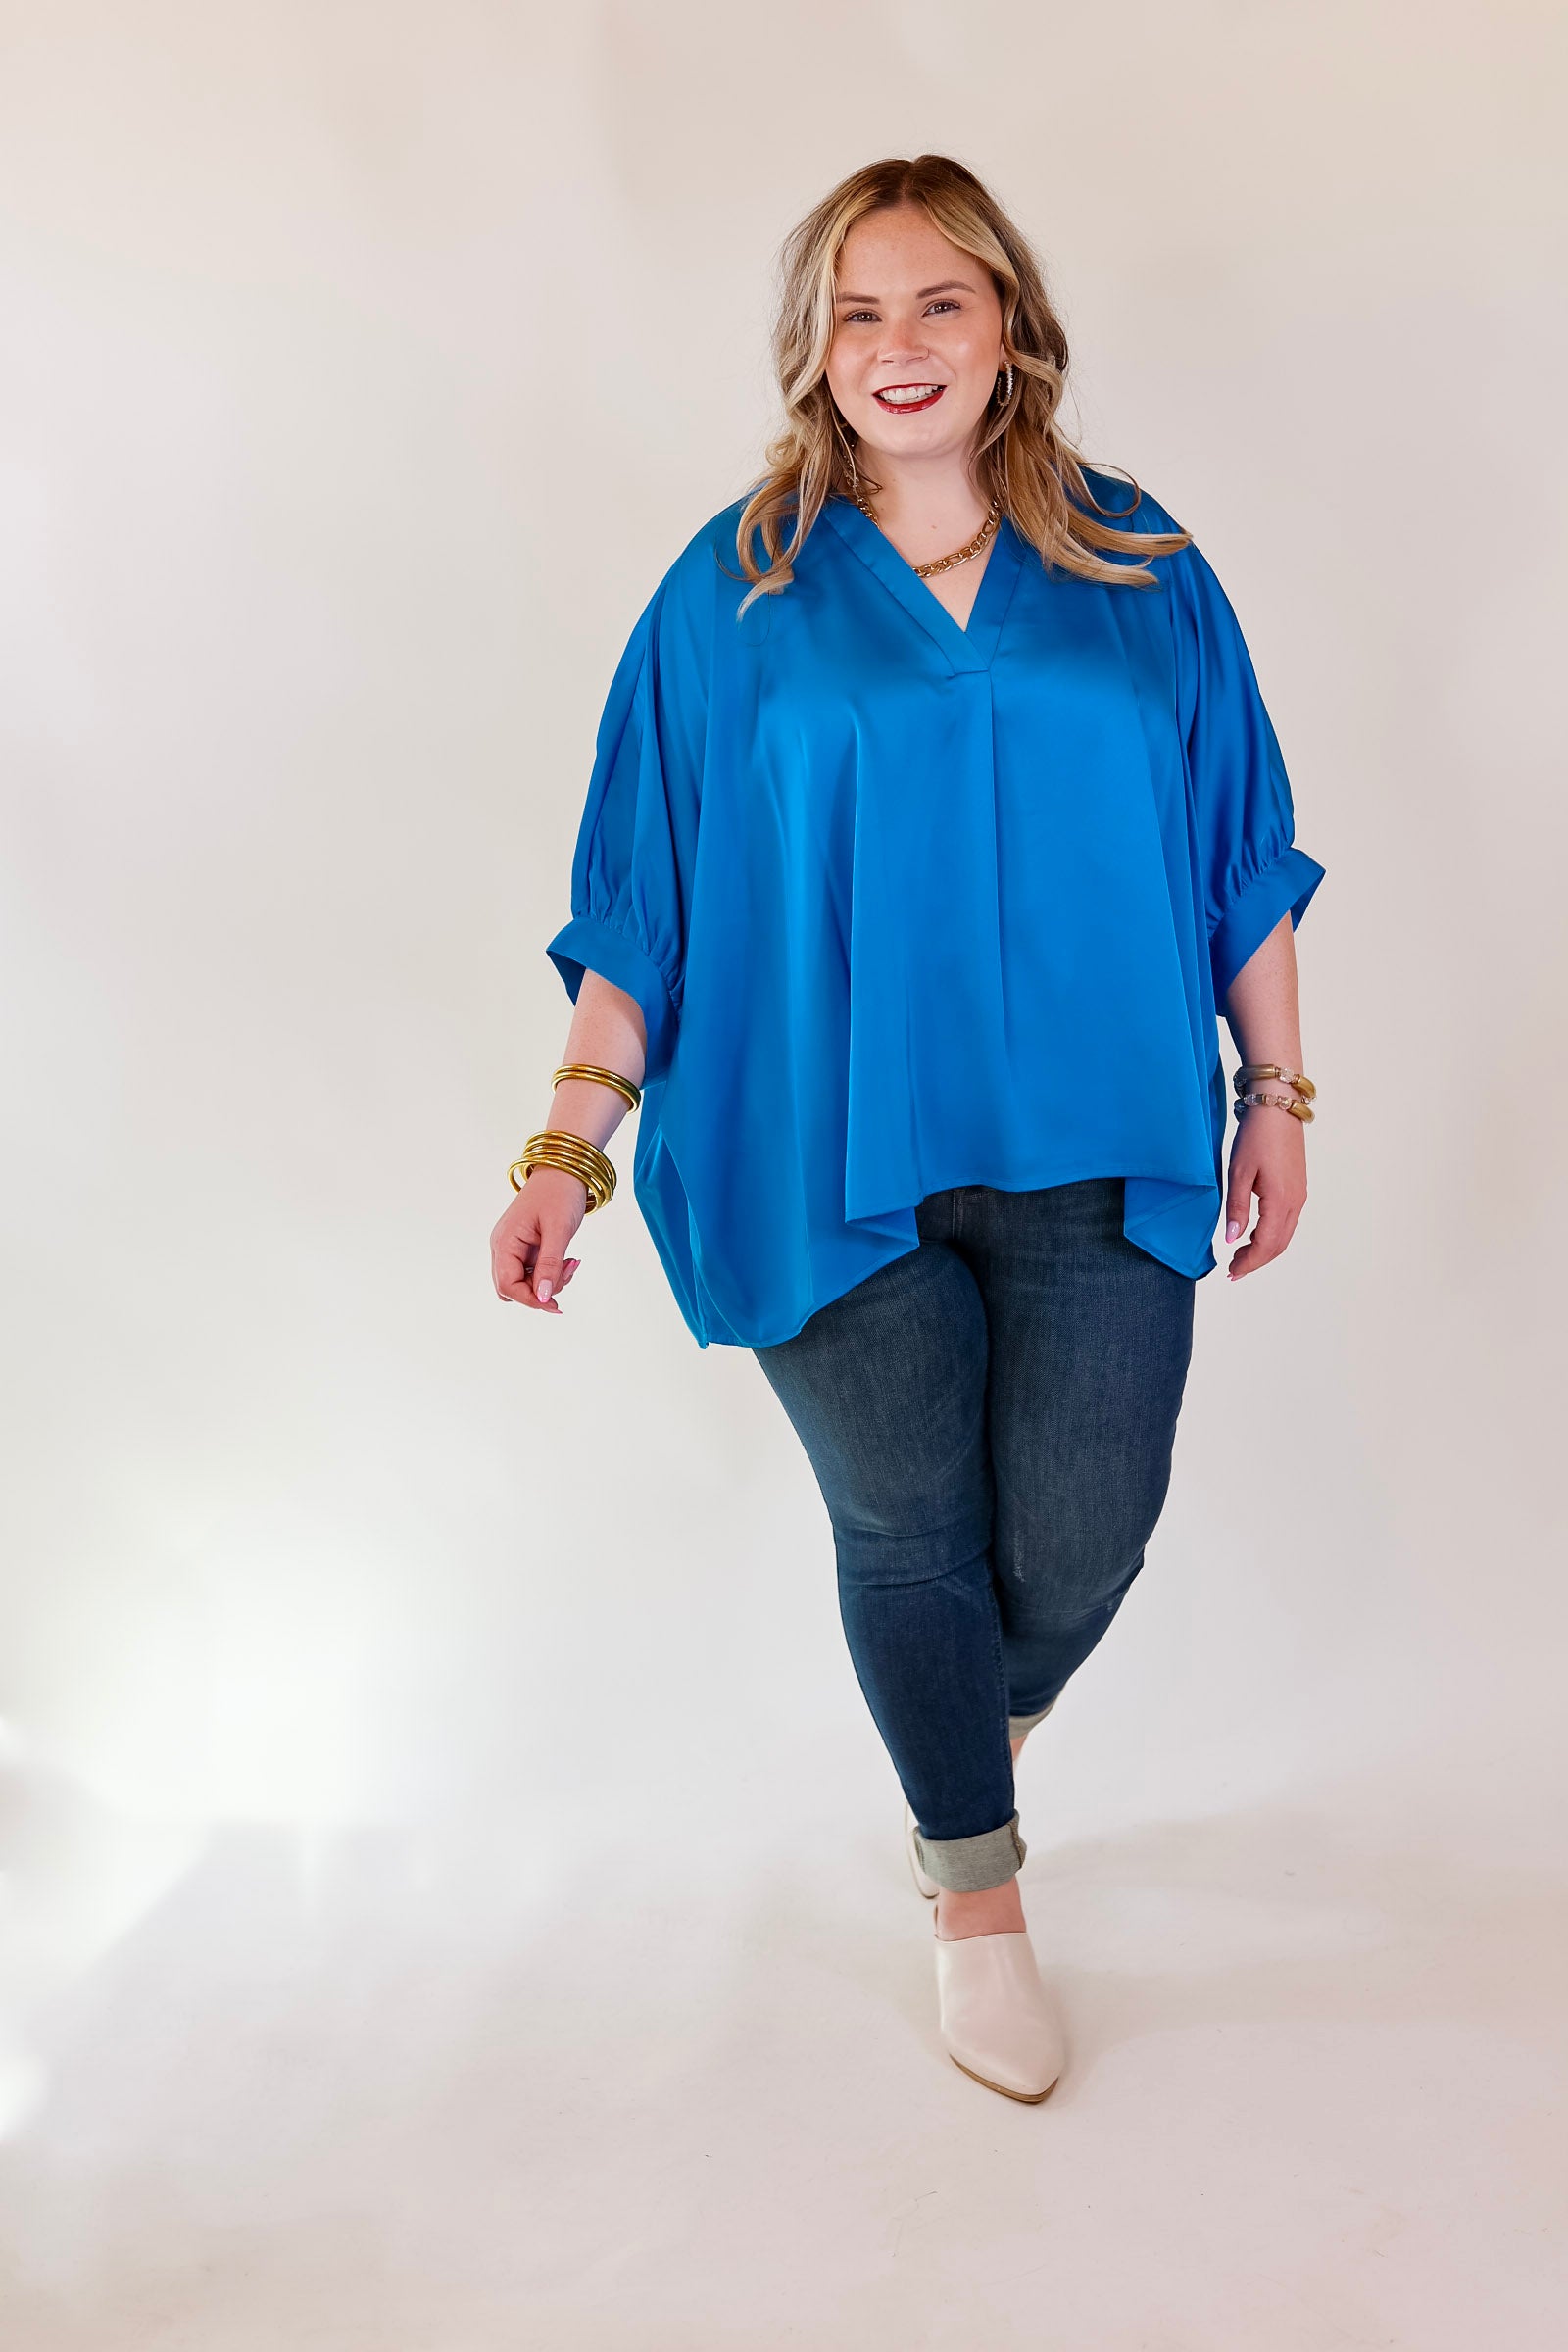 Irresistibly Chic Half Sleeve Oversized Blouse in Blue - Giddy Up Glamour Boutique